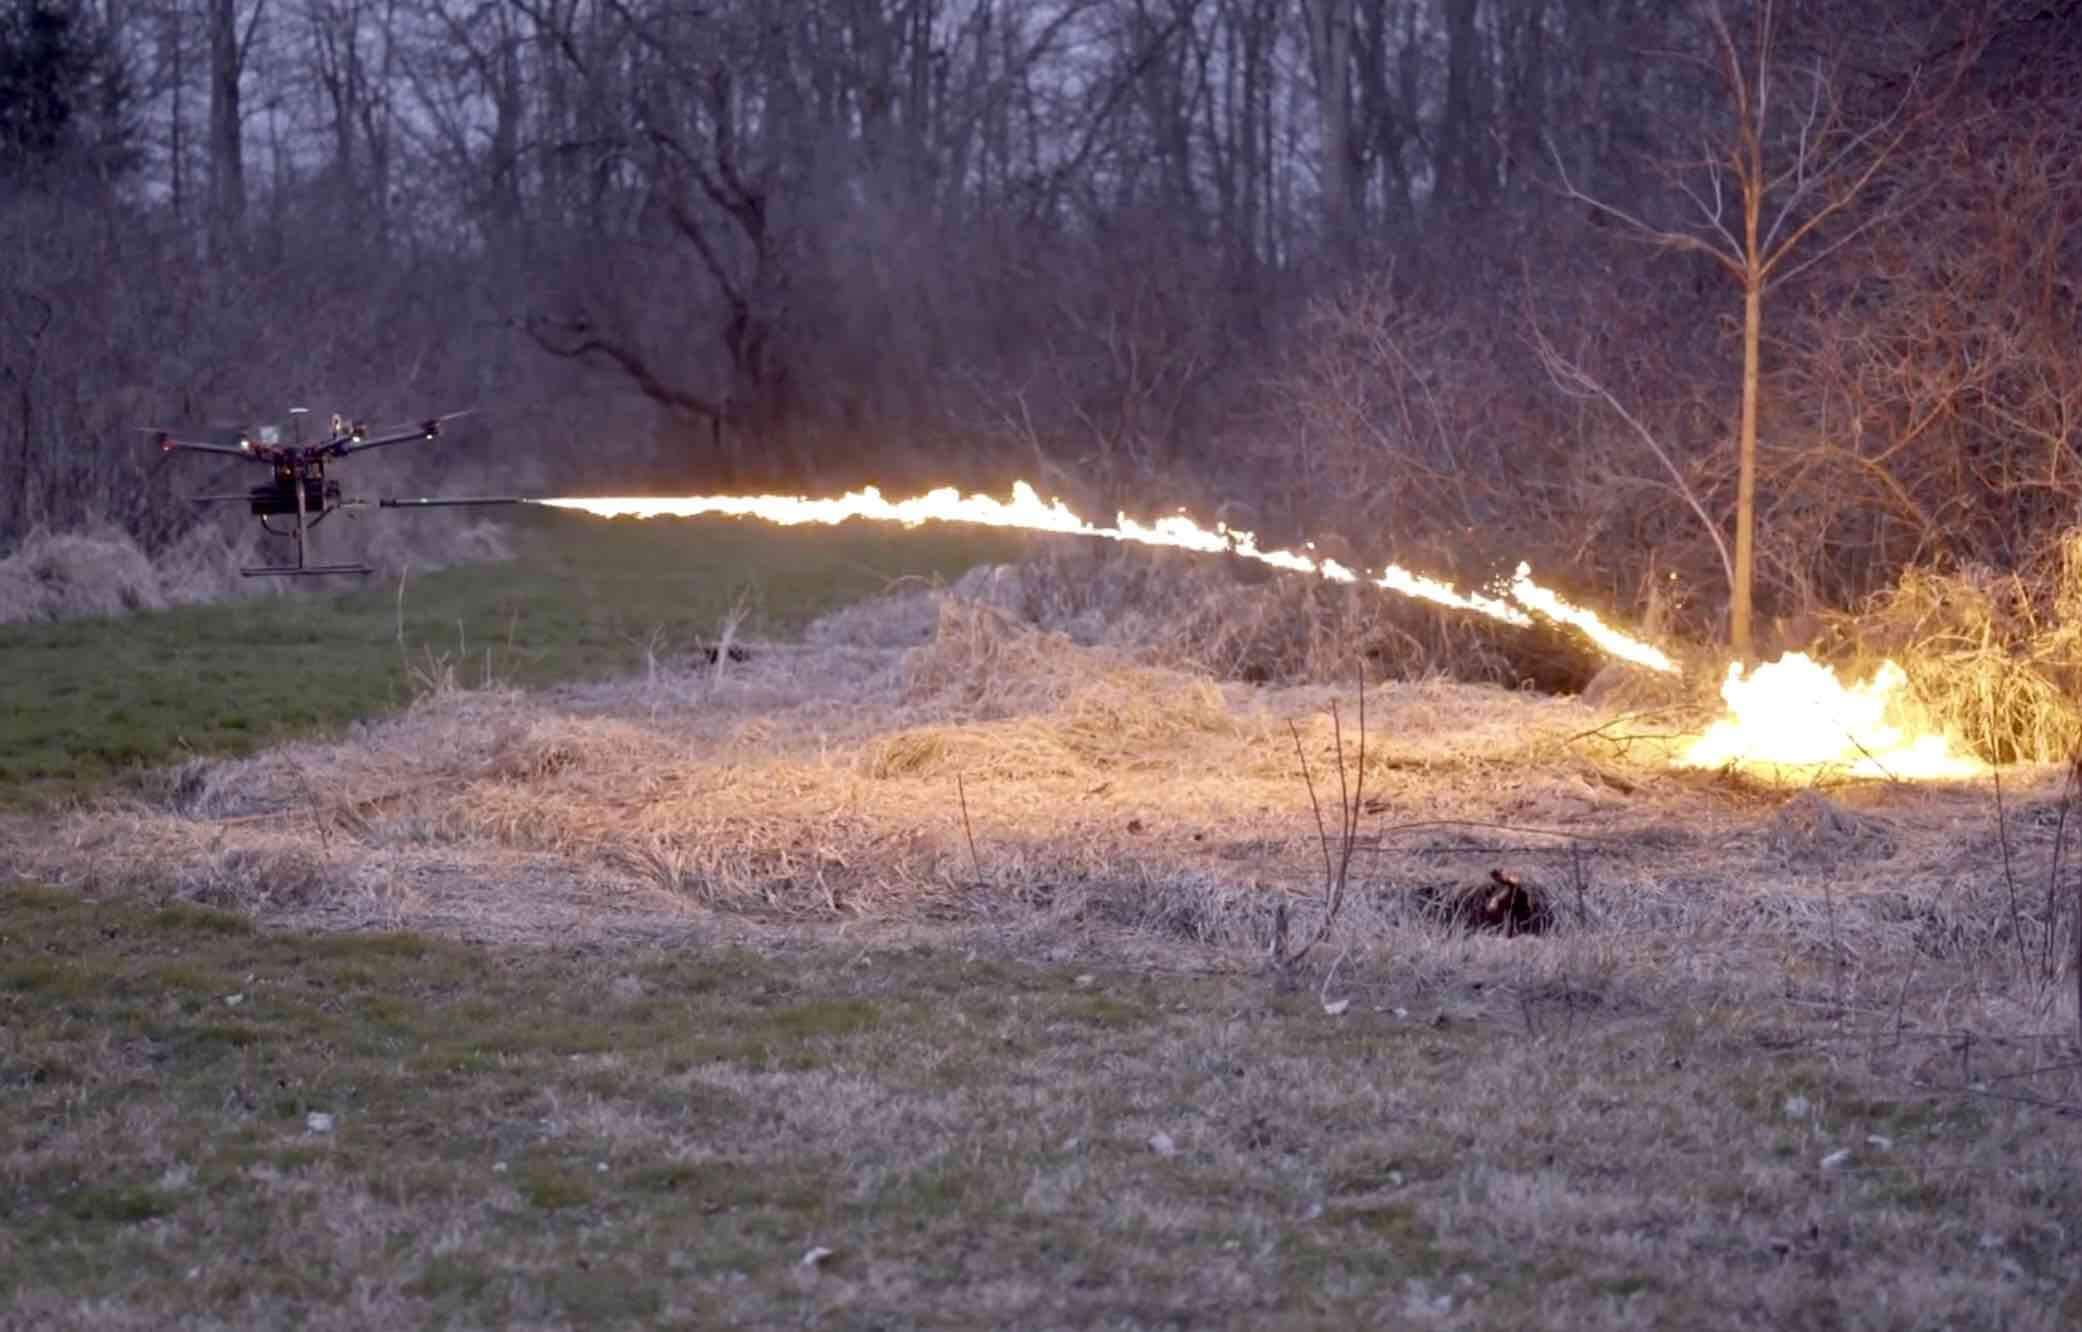 Check out this flamethrower attachment for drones